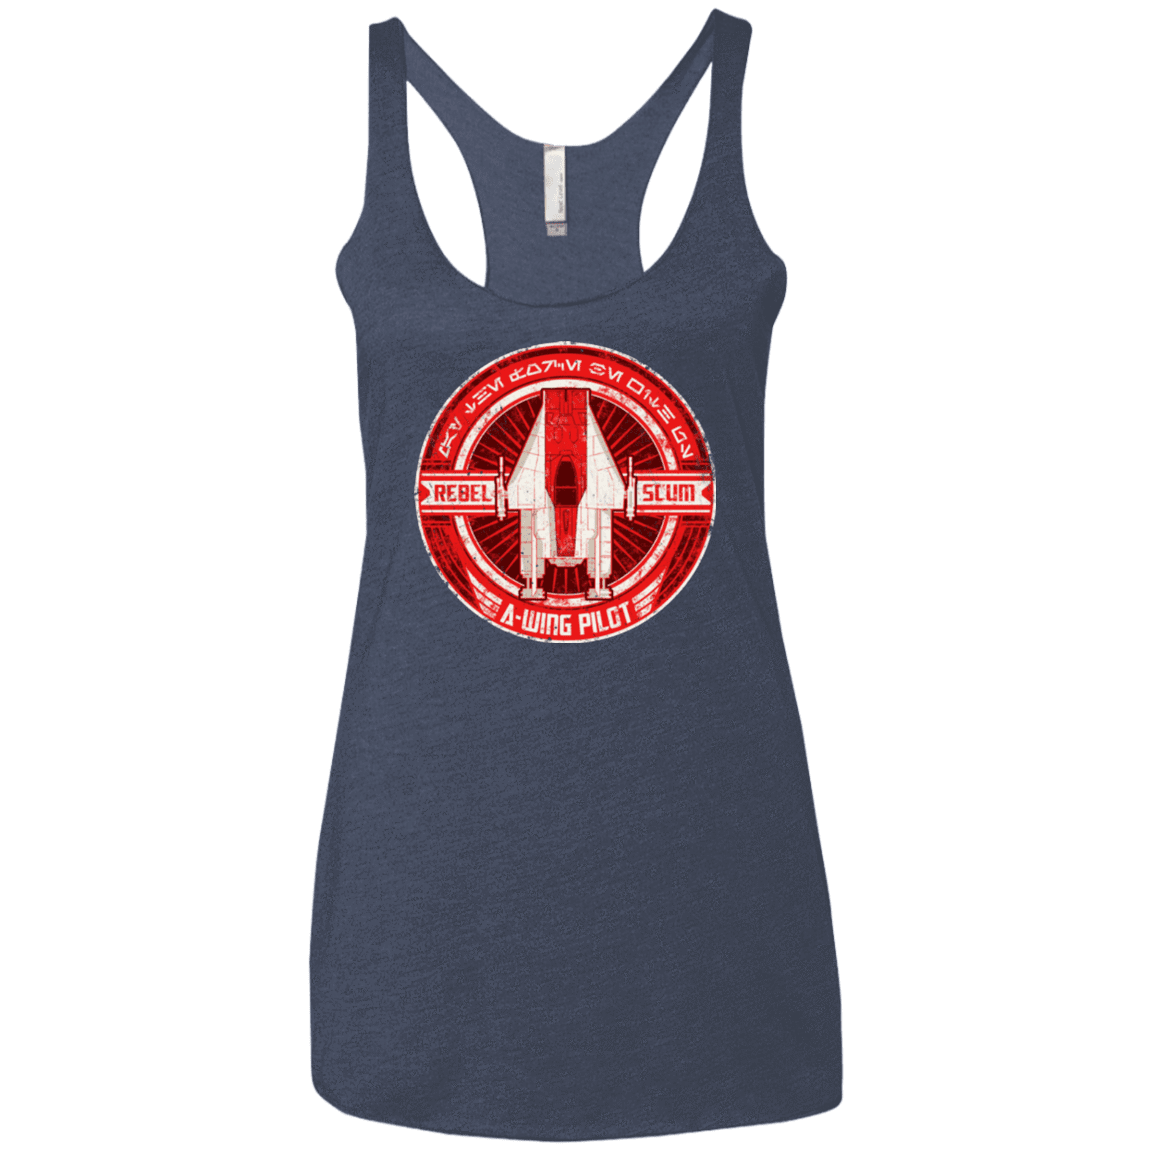 T-Shirts Vintage Navy / X-Small A-Wing Women's Triblend Racerback Tank